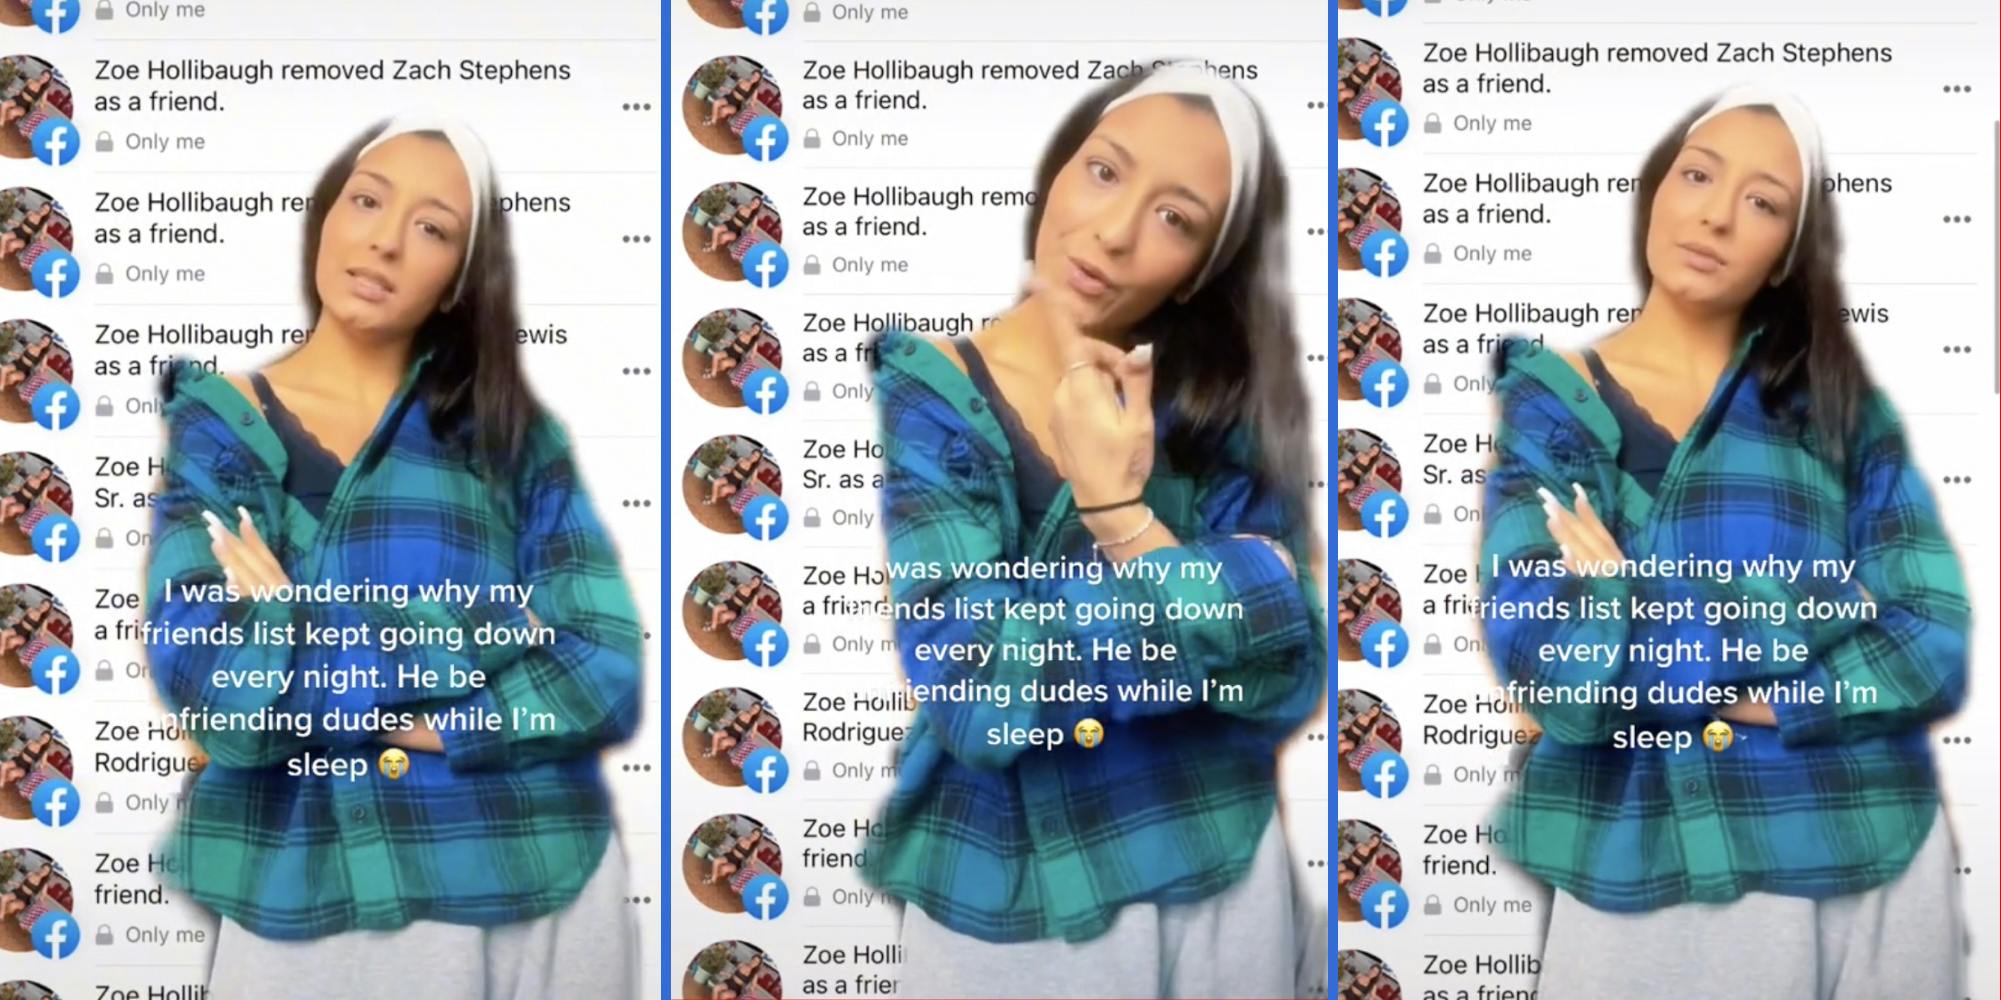  Woman exposes partner who presumably unfriended her male Facebook contacts in viral TikTok.